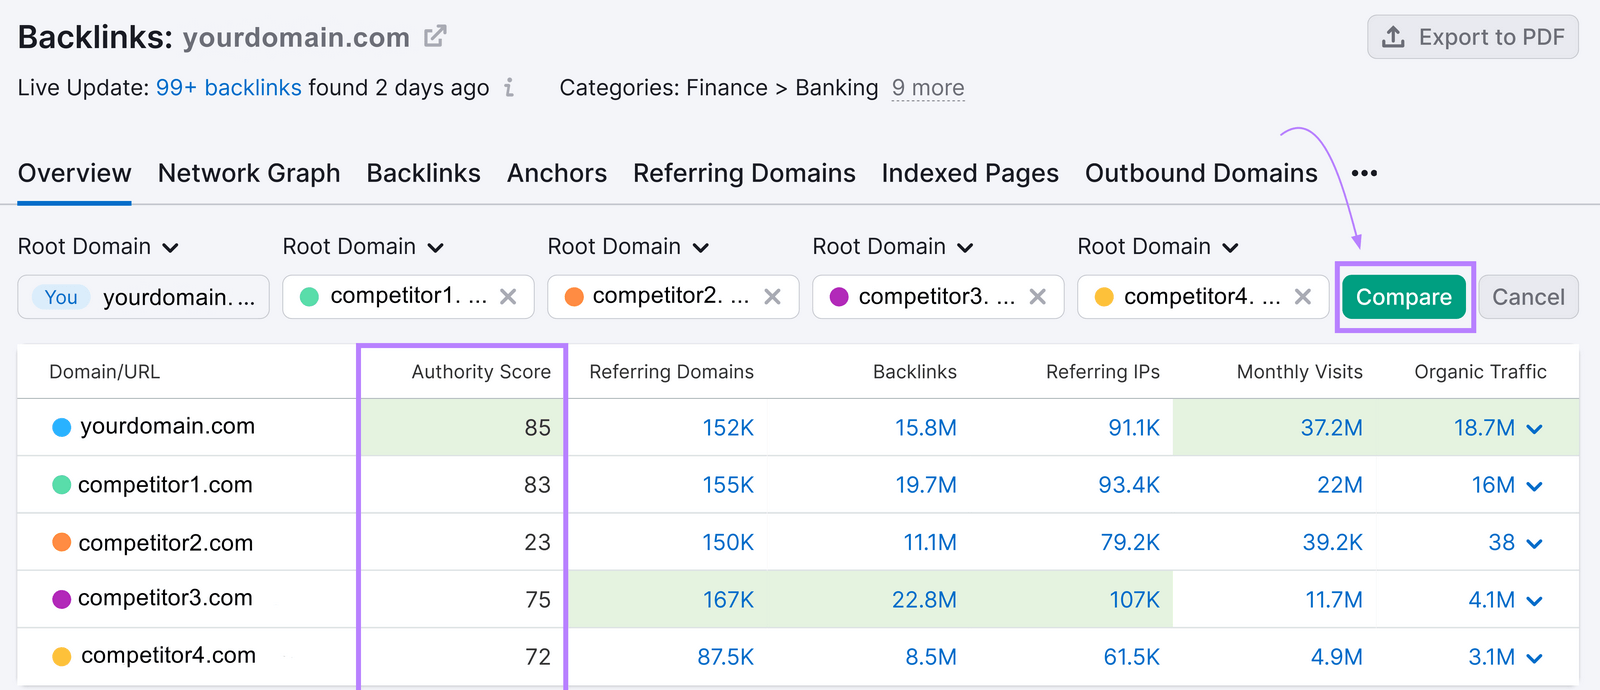 example of competitors and "Compare" button highlighted in Backlink Analytics